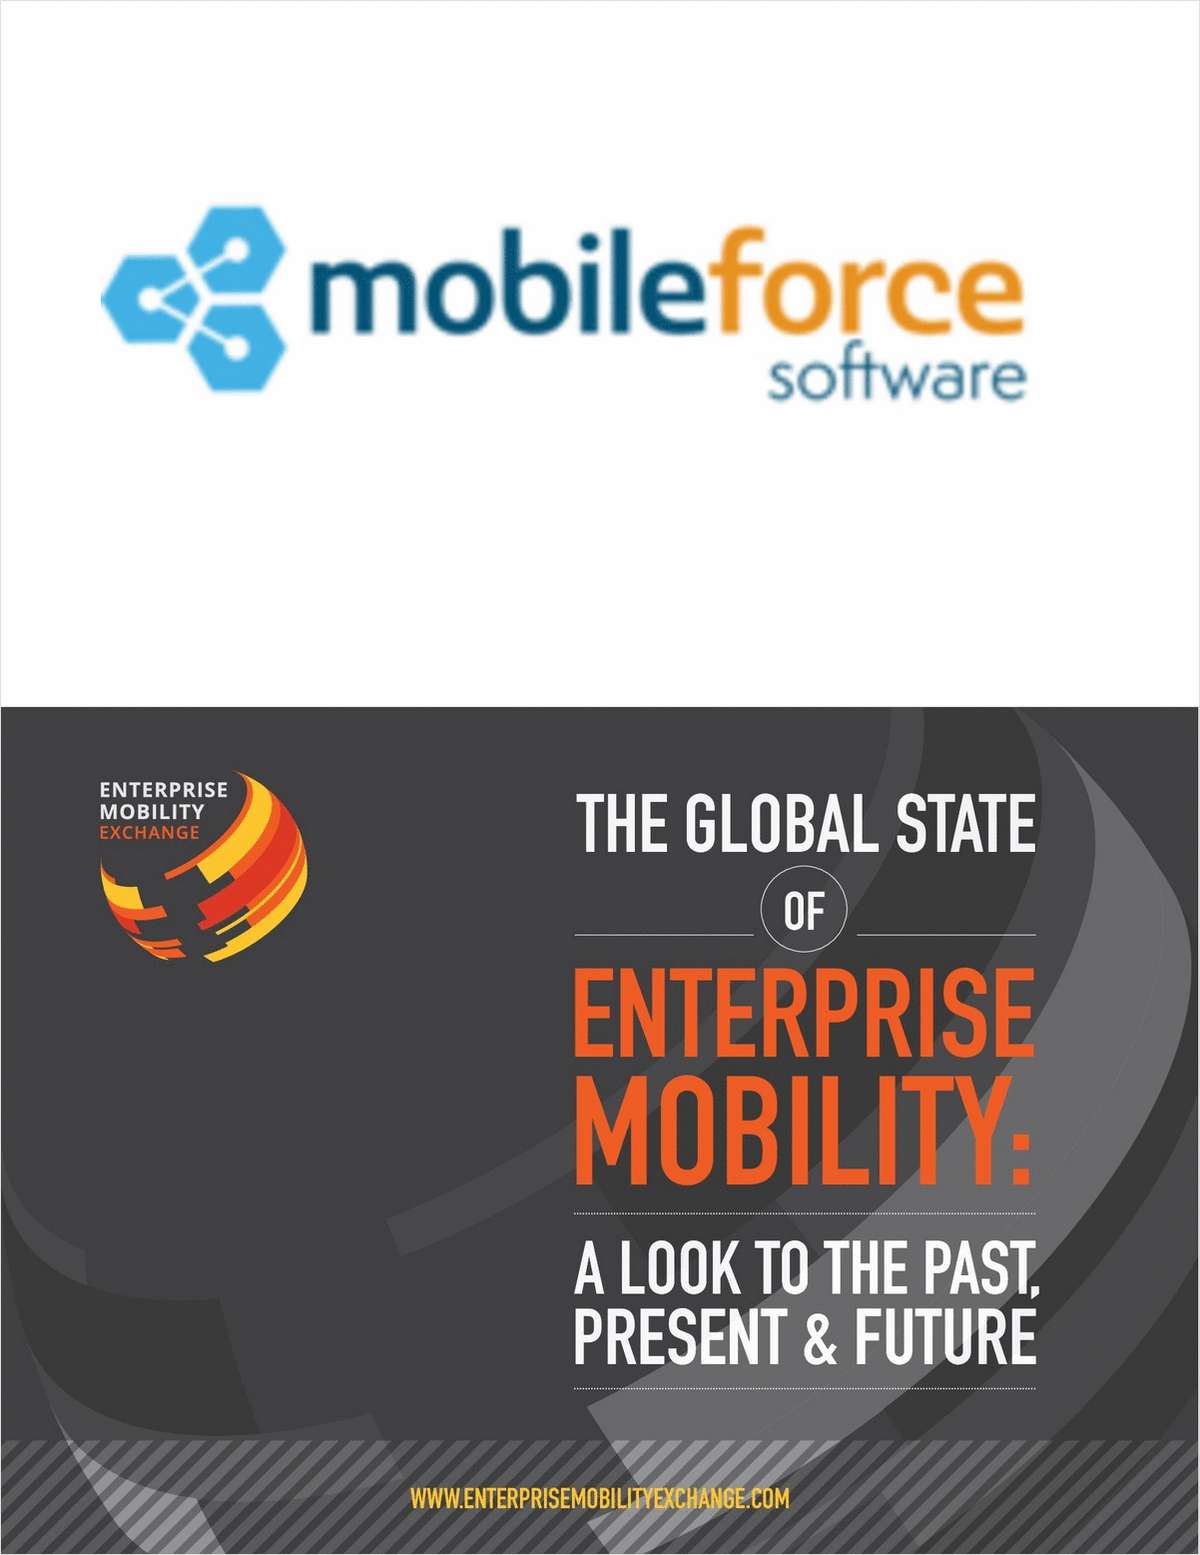 The Global State of Enterprise Mobility